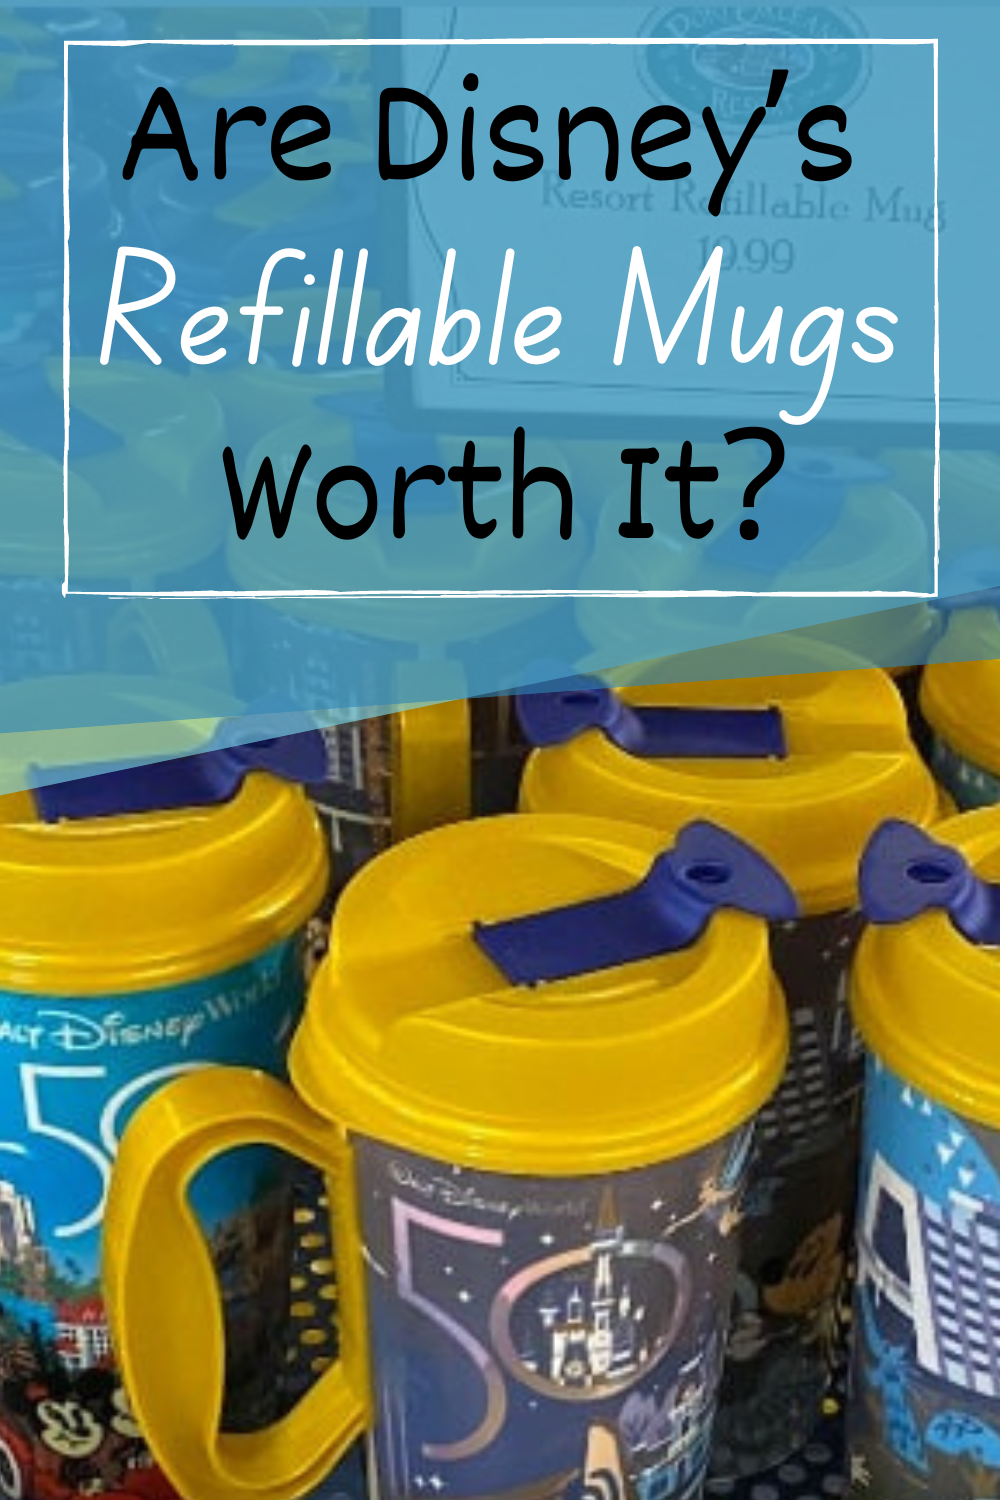 These refillable mugs can save you some money on your next Disney World vacation and they also can be a great souvenir to take home. They aren't right for every guest though so check out out guide to see if the value is worth it for you.